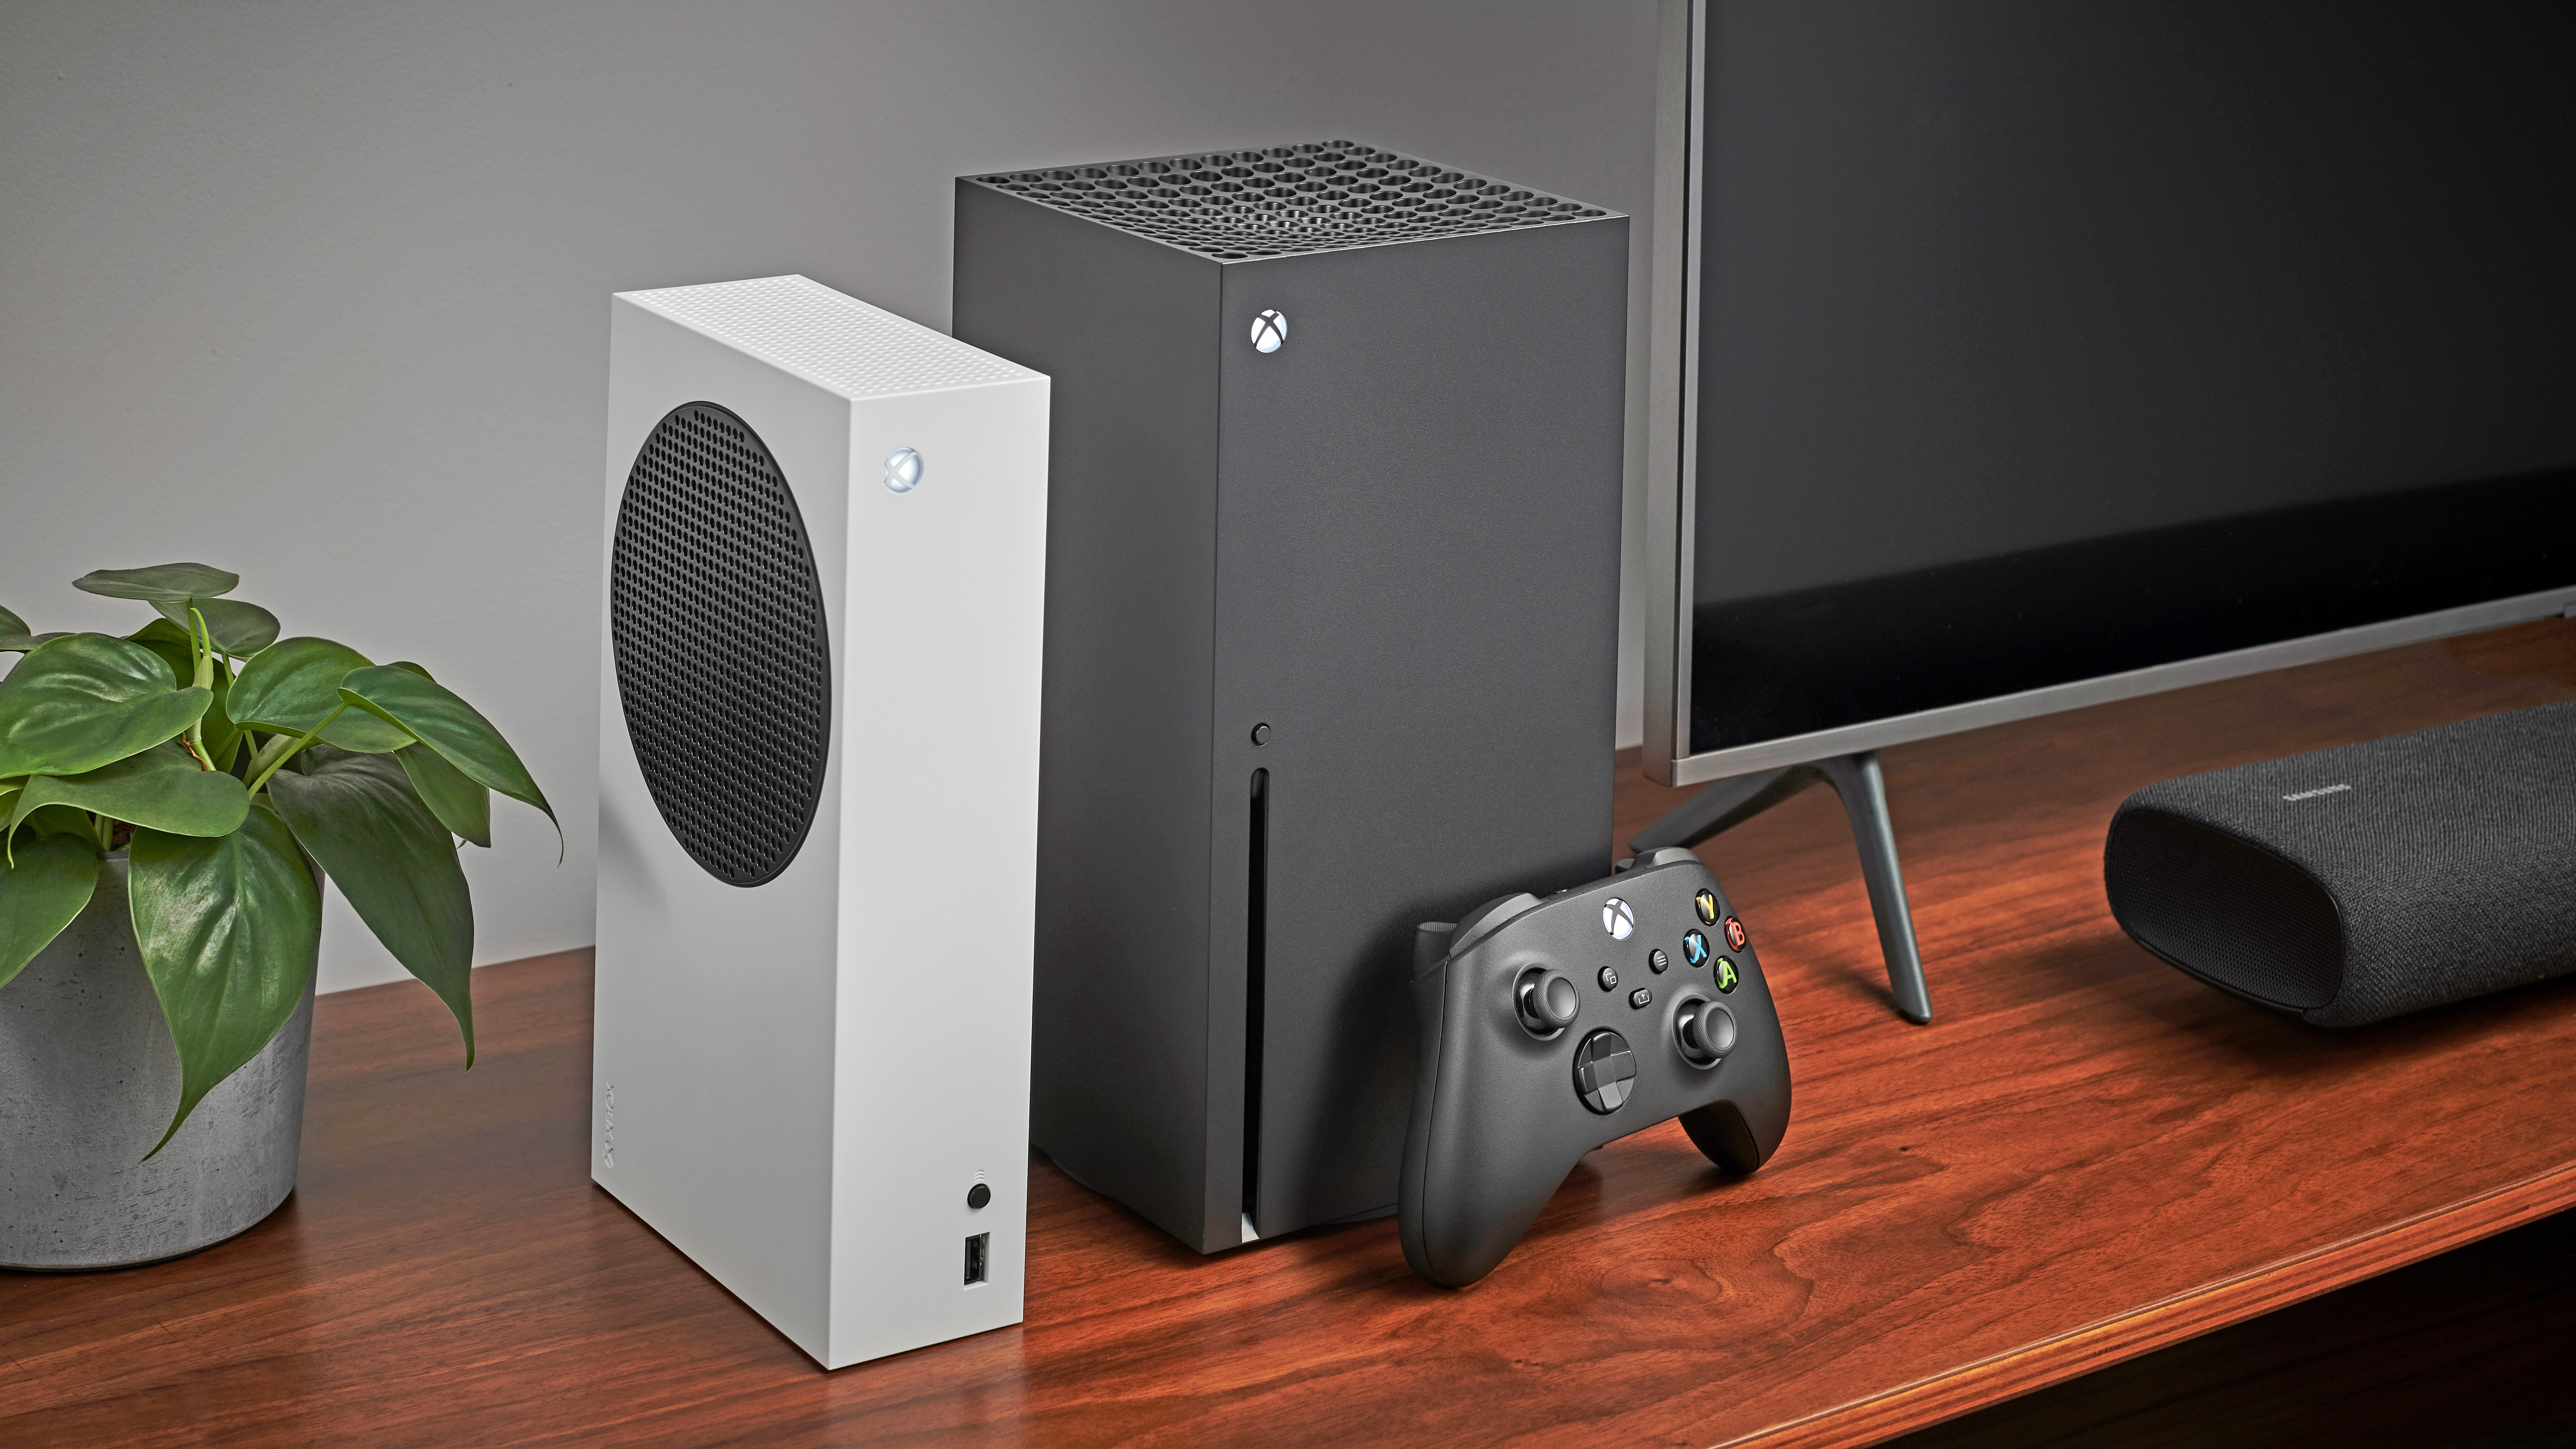 An image of an Xbox Series X next to an Xbox Series S on a wooden TV stand next to a TV, with a black controller leaning on the Xbox Series X.